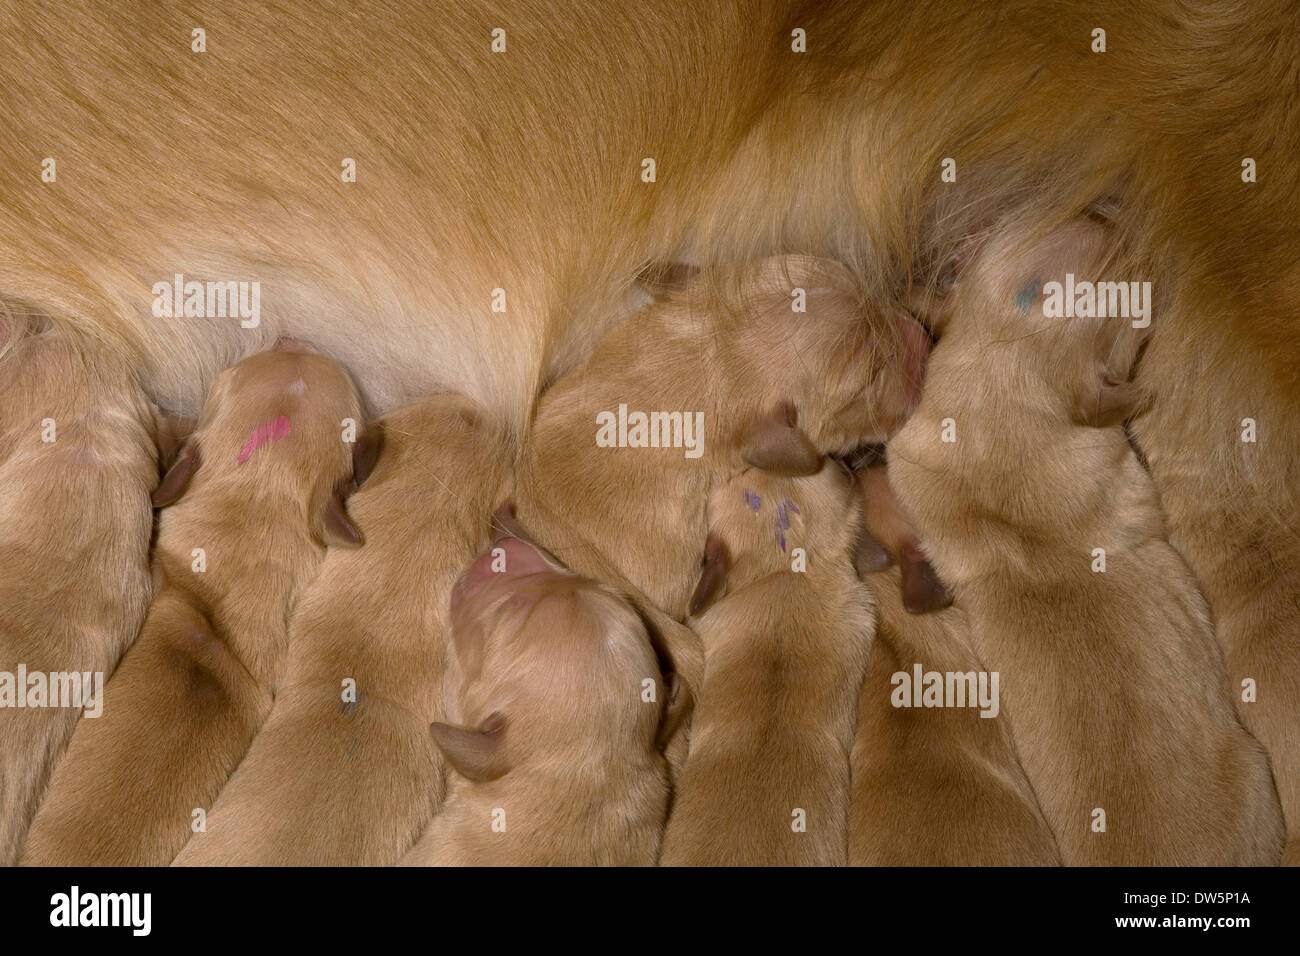 Golden Retriever, puppies, very young, one day old, suckling from mother Stock Photo